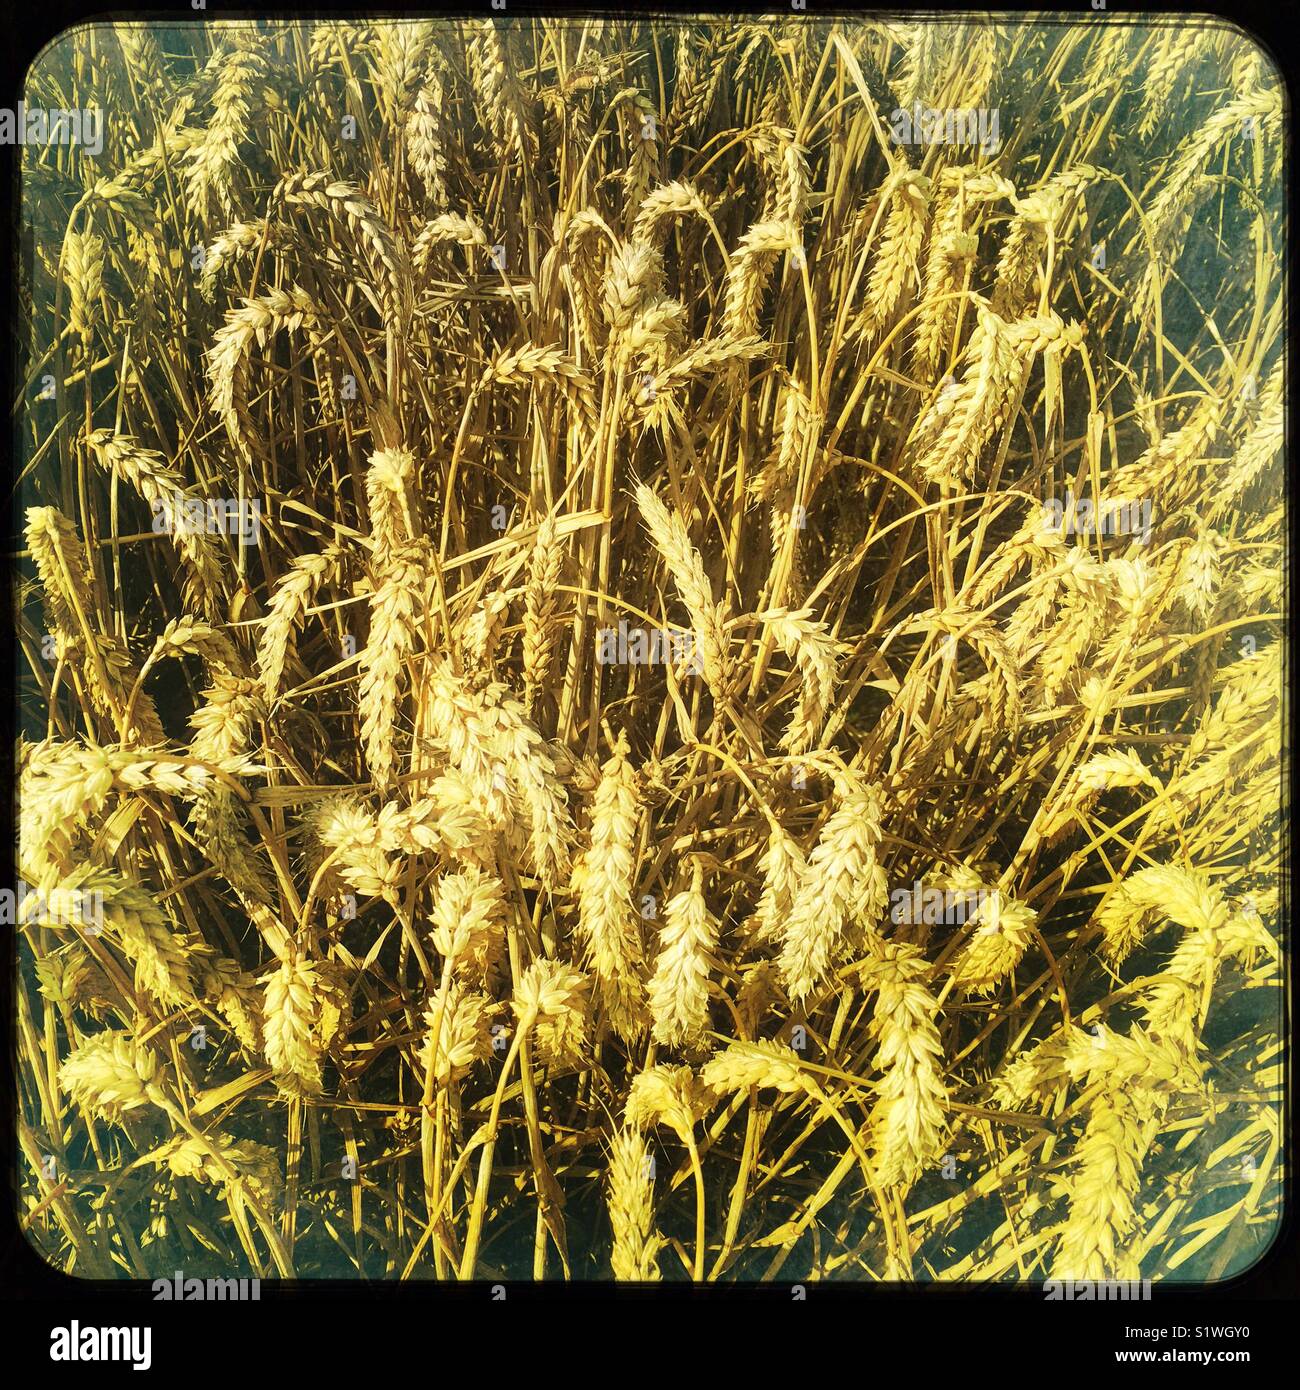 Crop of winter wheat close to harvest, England, United Kingdom Stock Photo